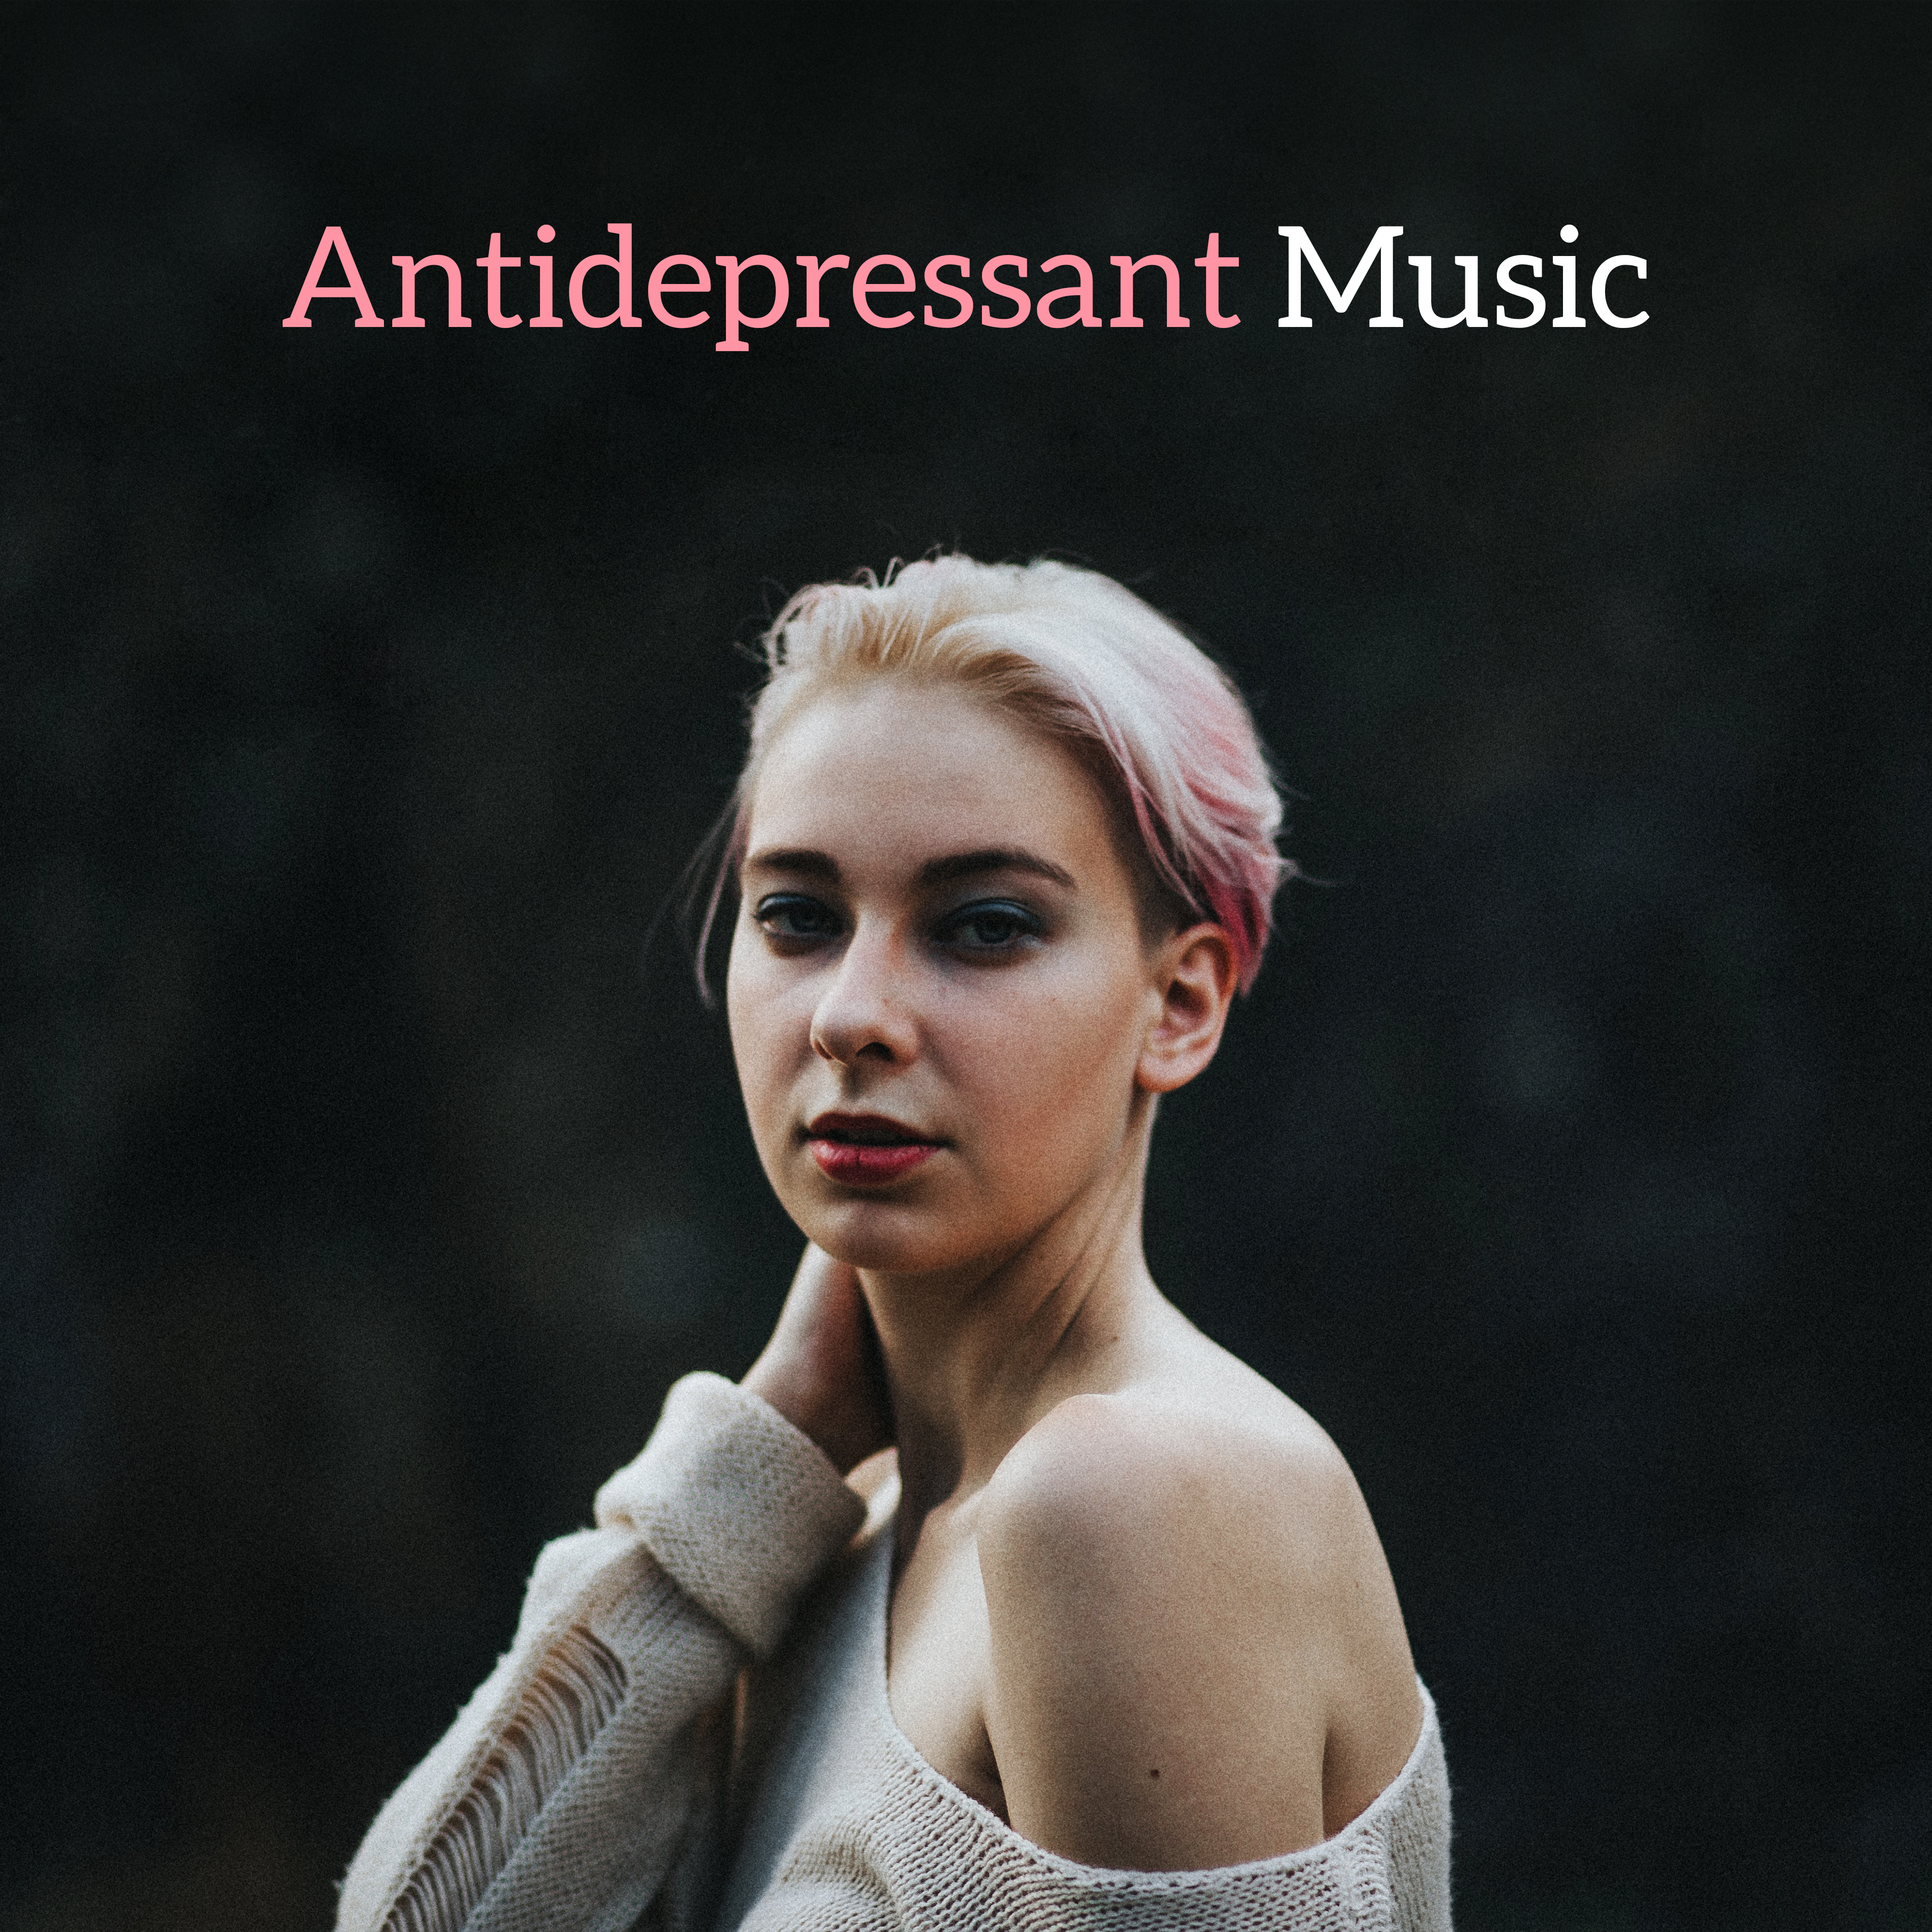 Antidepressant Music – Healing Music, Full Of Calming Nature Sounds, Zen, Bliss, Stress Relief, Reduce Anxiety